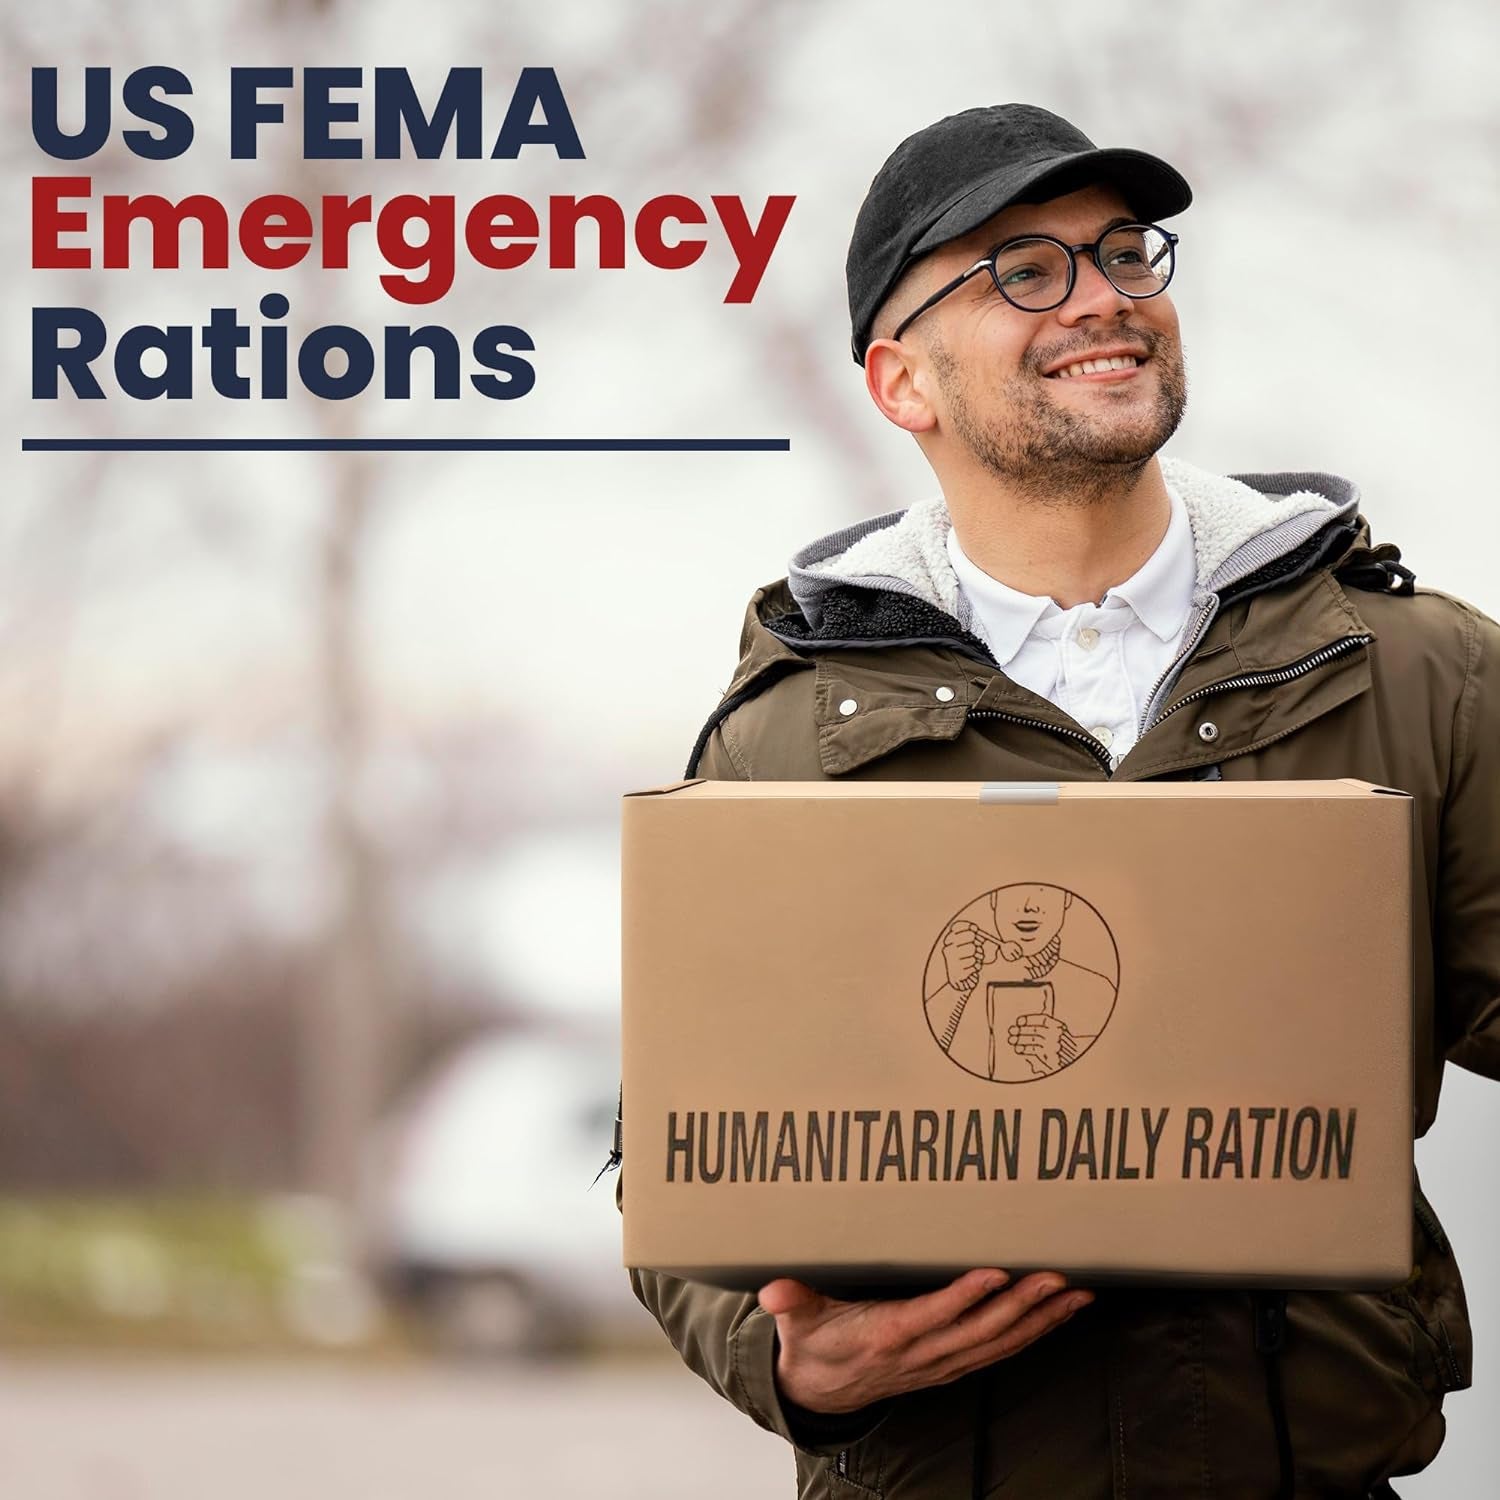 Humanitarian Daily Ration MRE Case – 5 US FEMA Emergency Rations Meals Ready to Eat Varieties for Hunting, Camping and More, 10 Pack